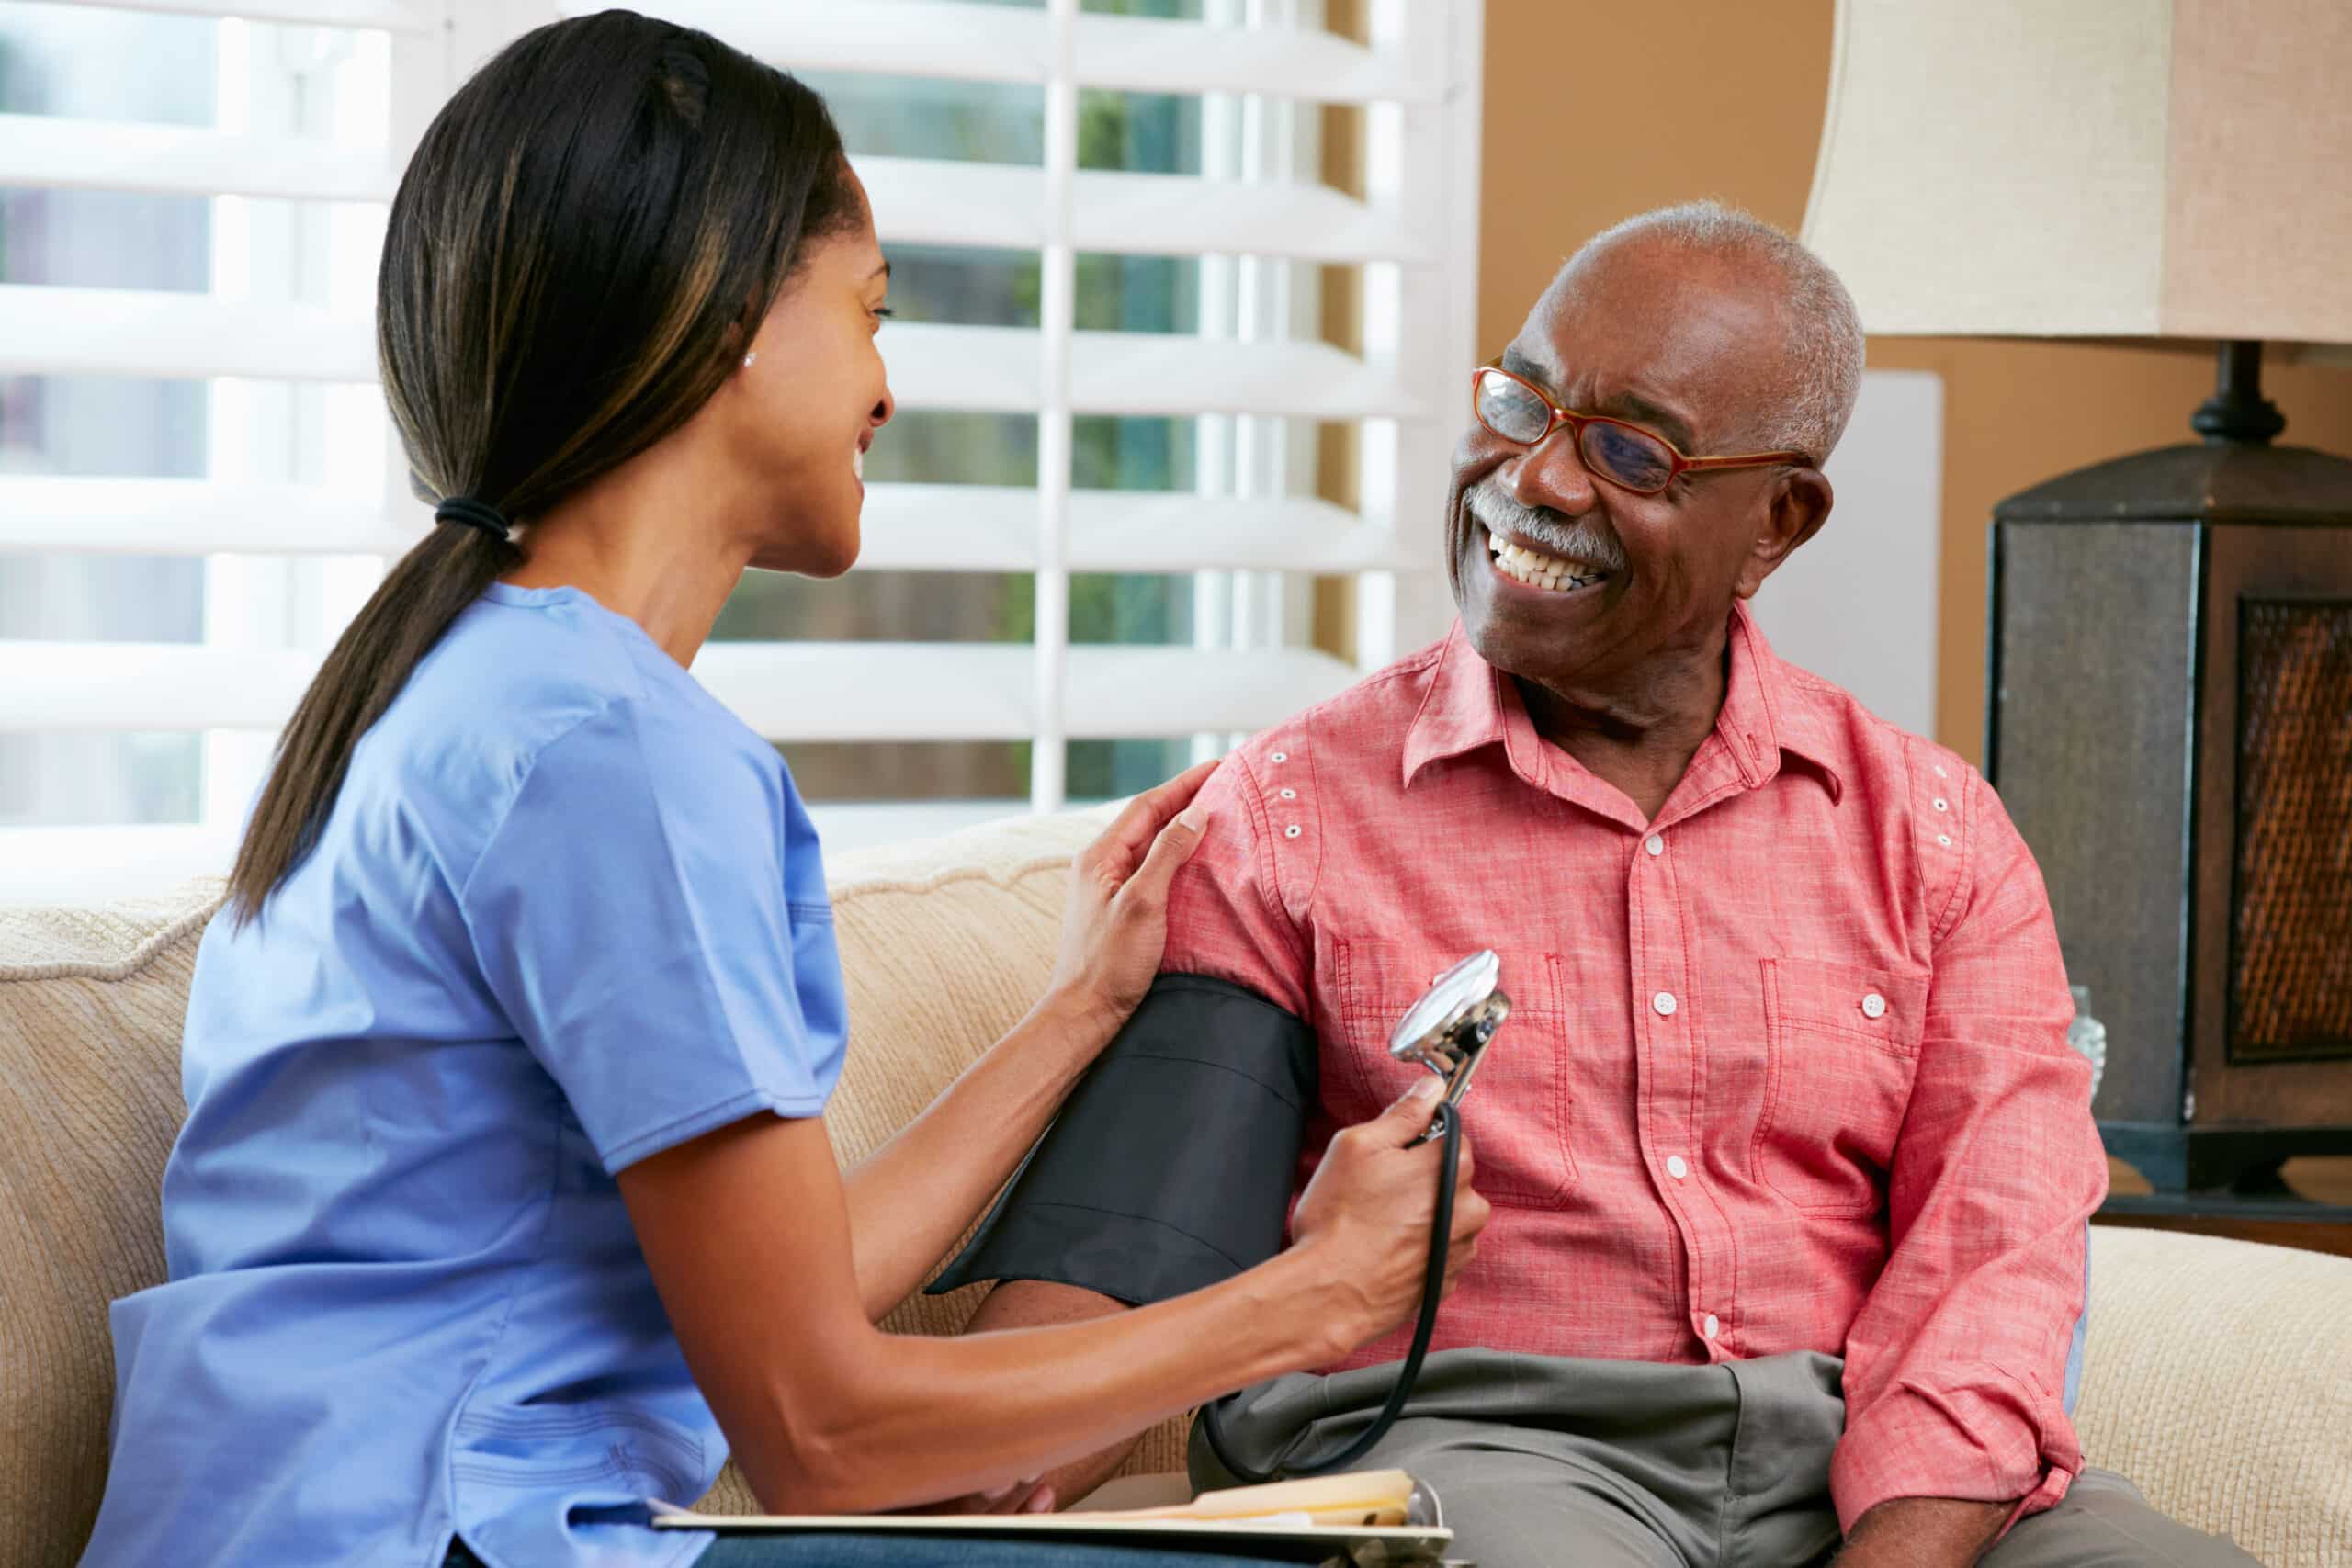 Nurse taking blood pressure of patient on couch